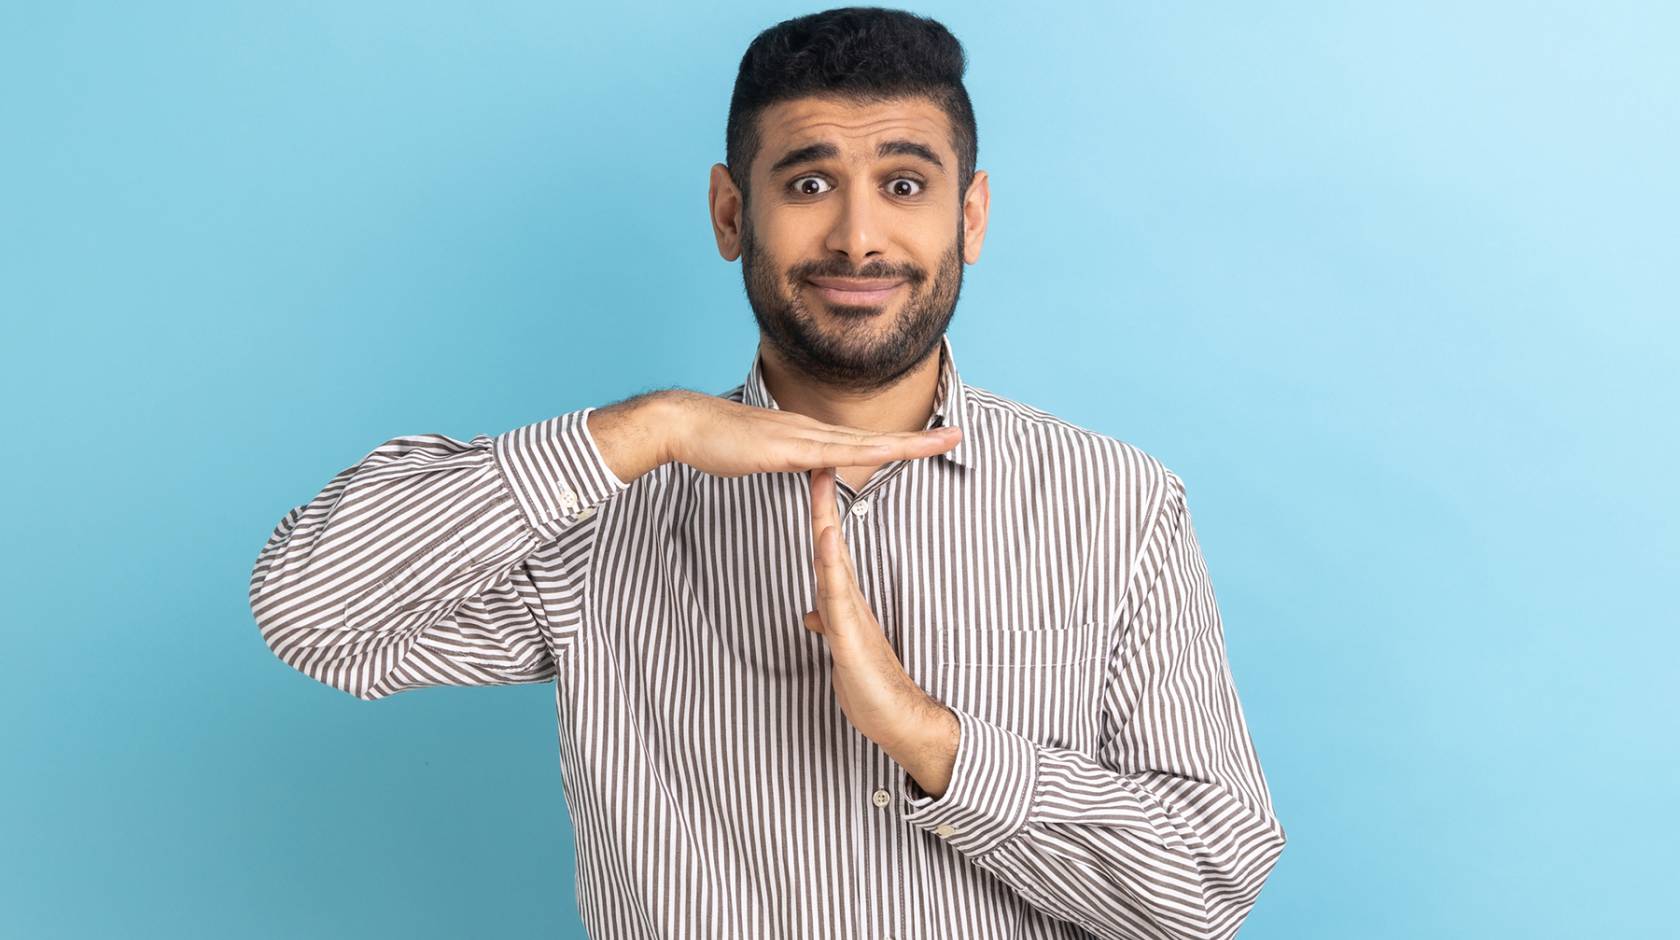 A bearded South Asian man making the timeout gesture